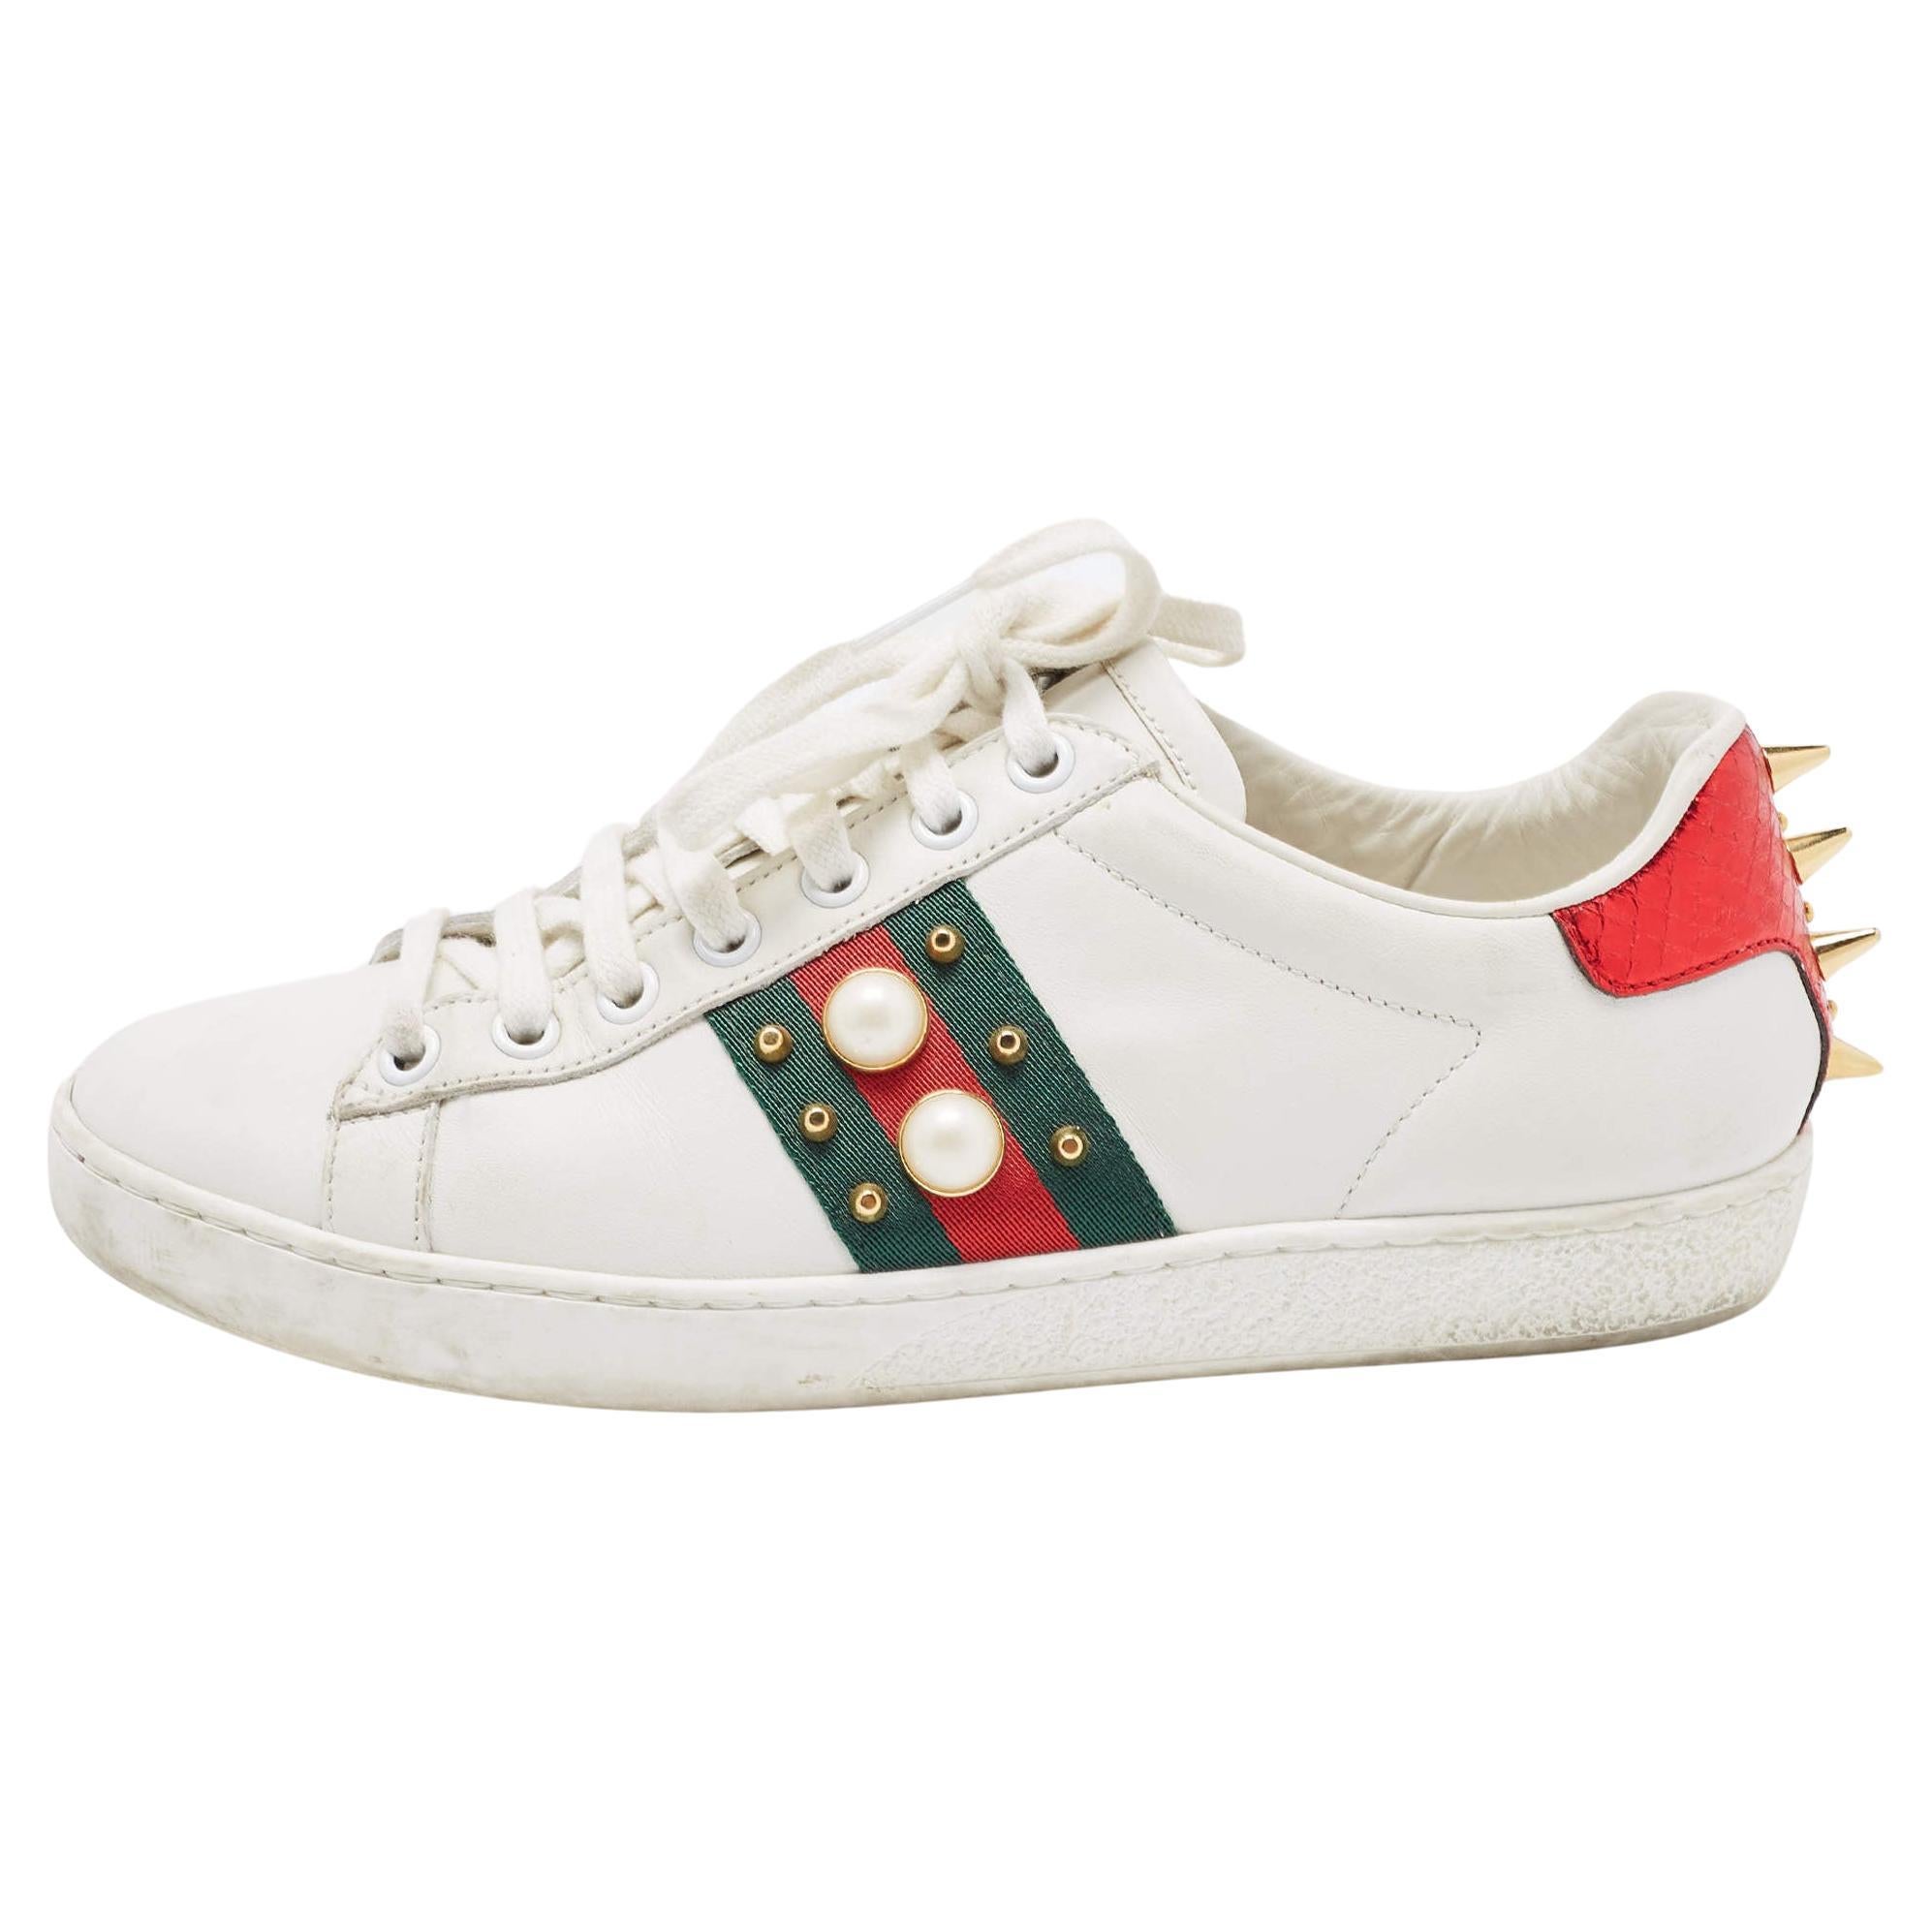 Gucci White Leather Studded and Spiked Ace Sneakers Size 36 For Sale